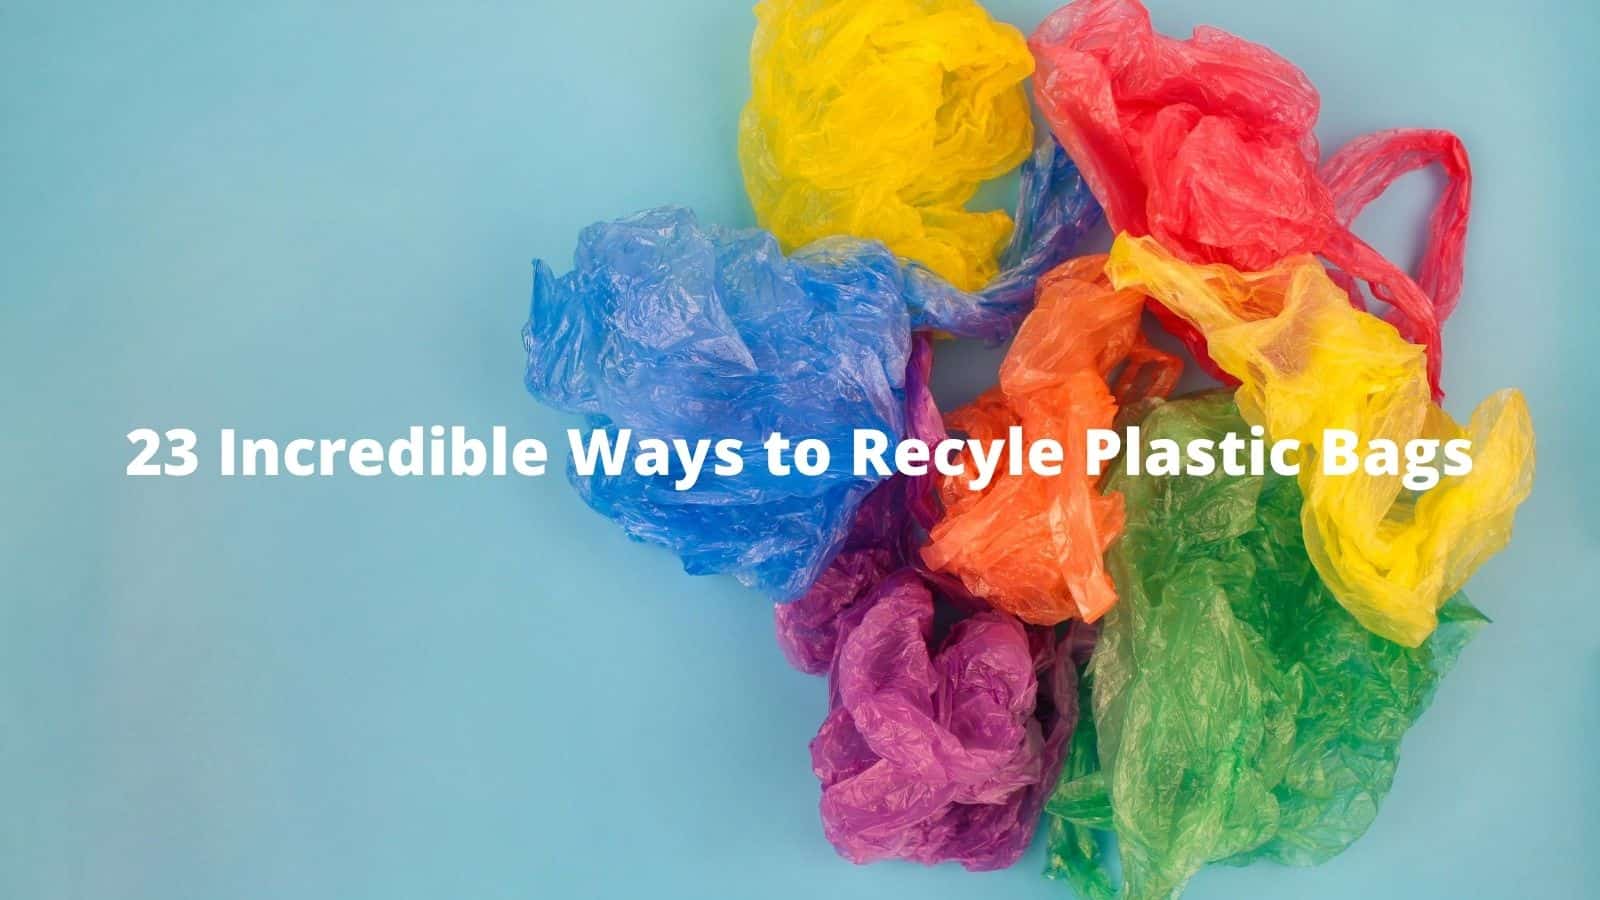 23 Incredible Ways to Recycle Plastic Bags